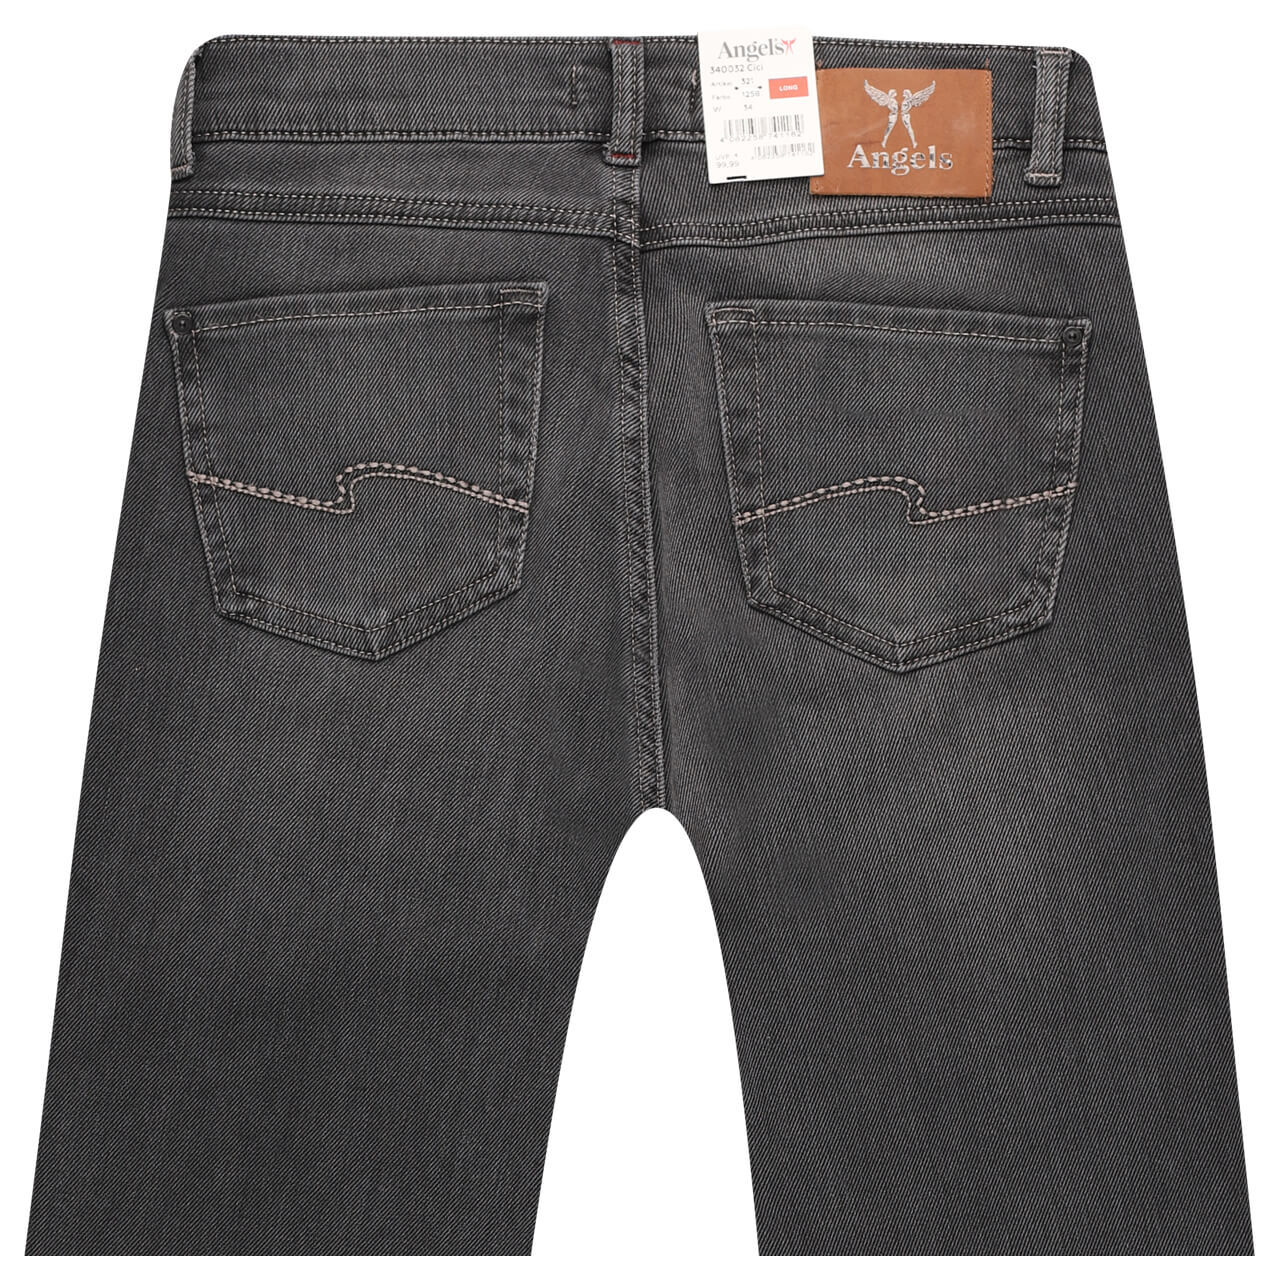 Angels Cici Jeans grey used buffi thermo denim